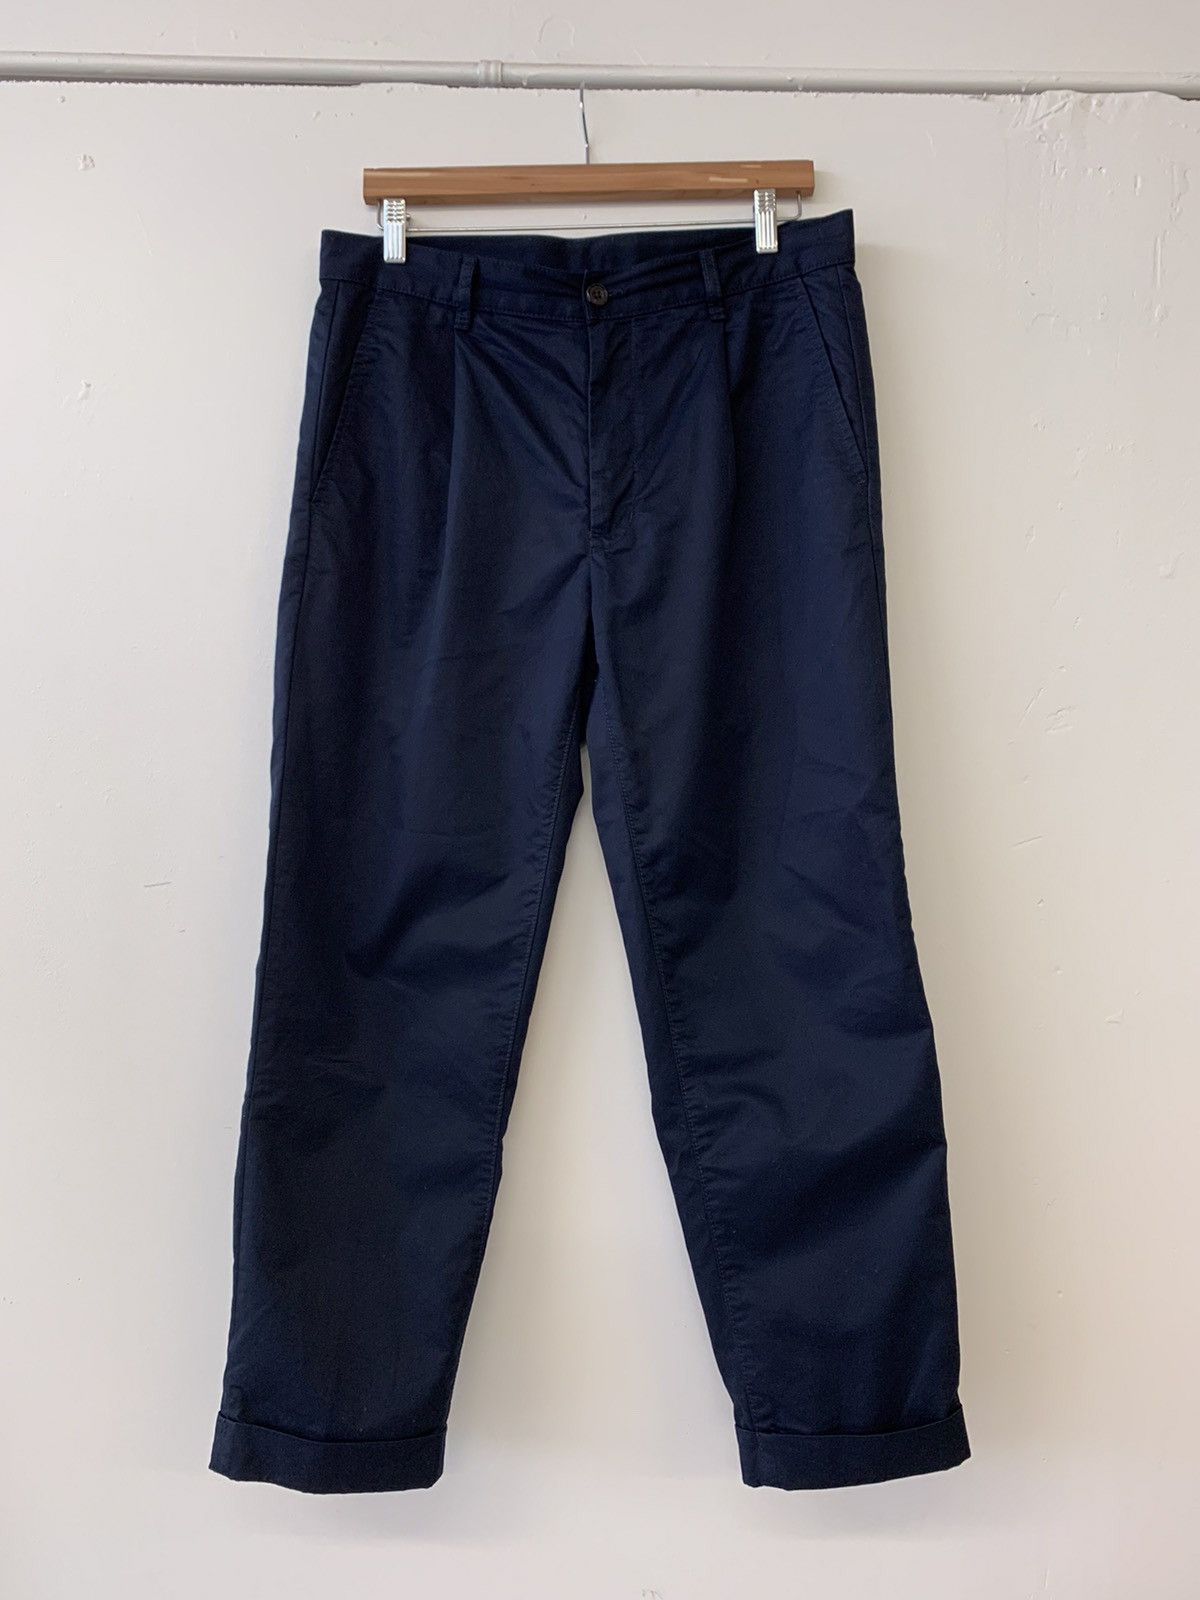 Beams Plus 1 Pleat 80/3 Twill Cotton Trousers | Grailed